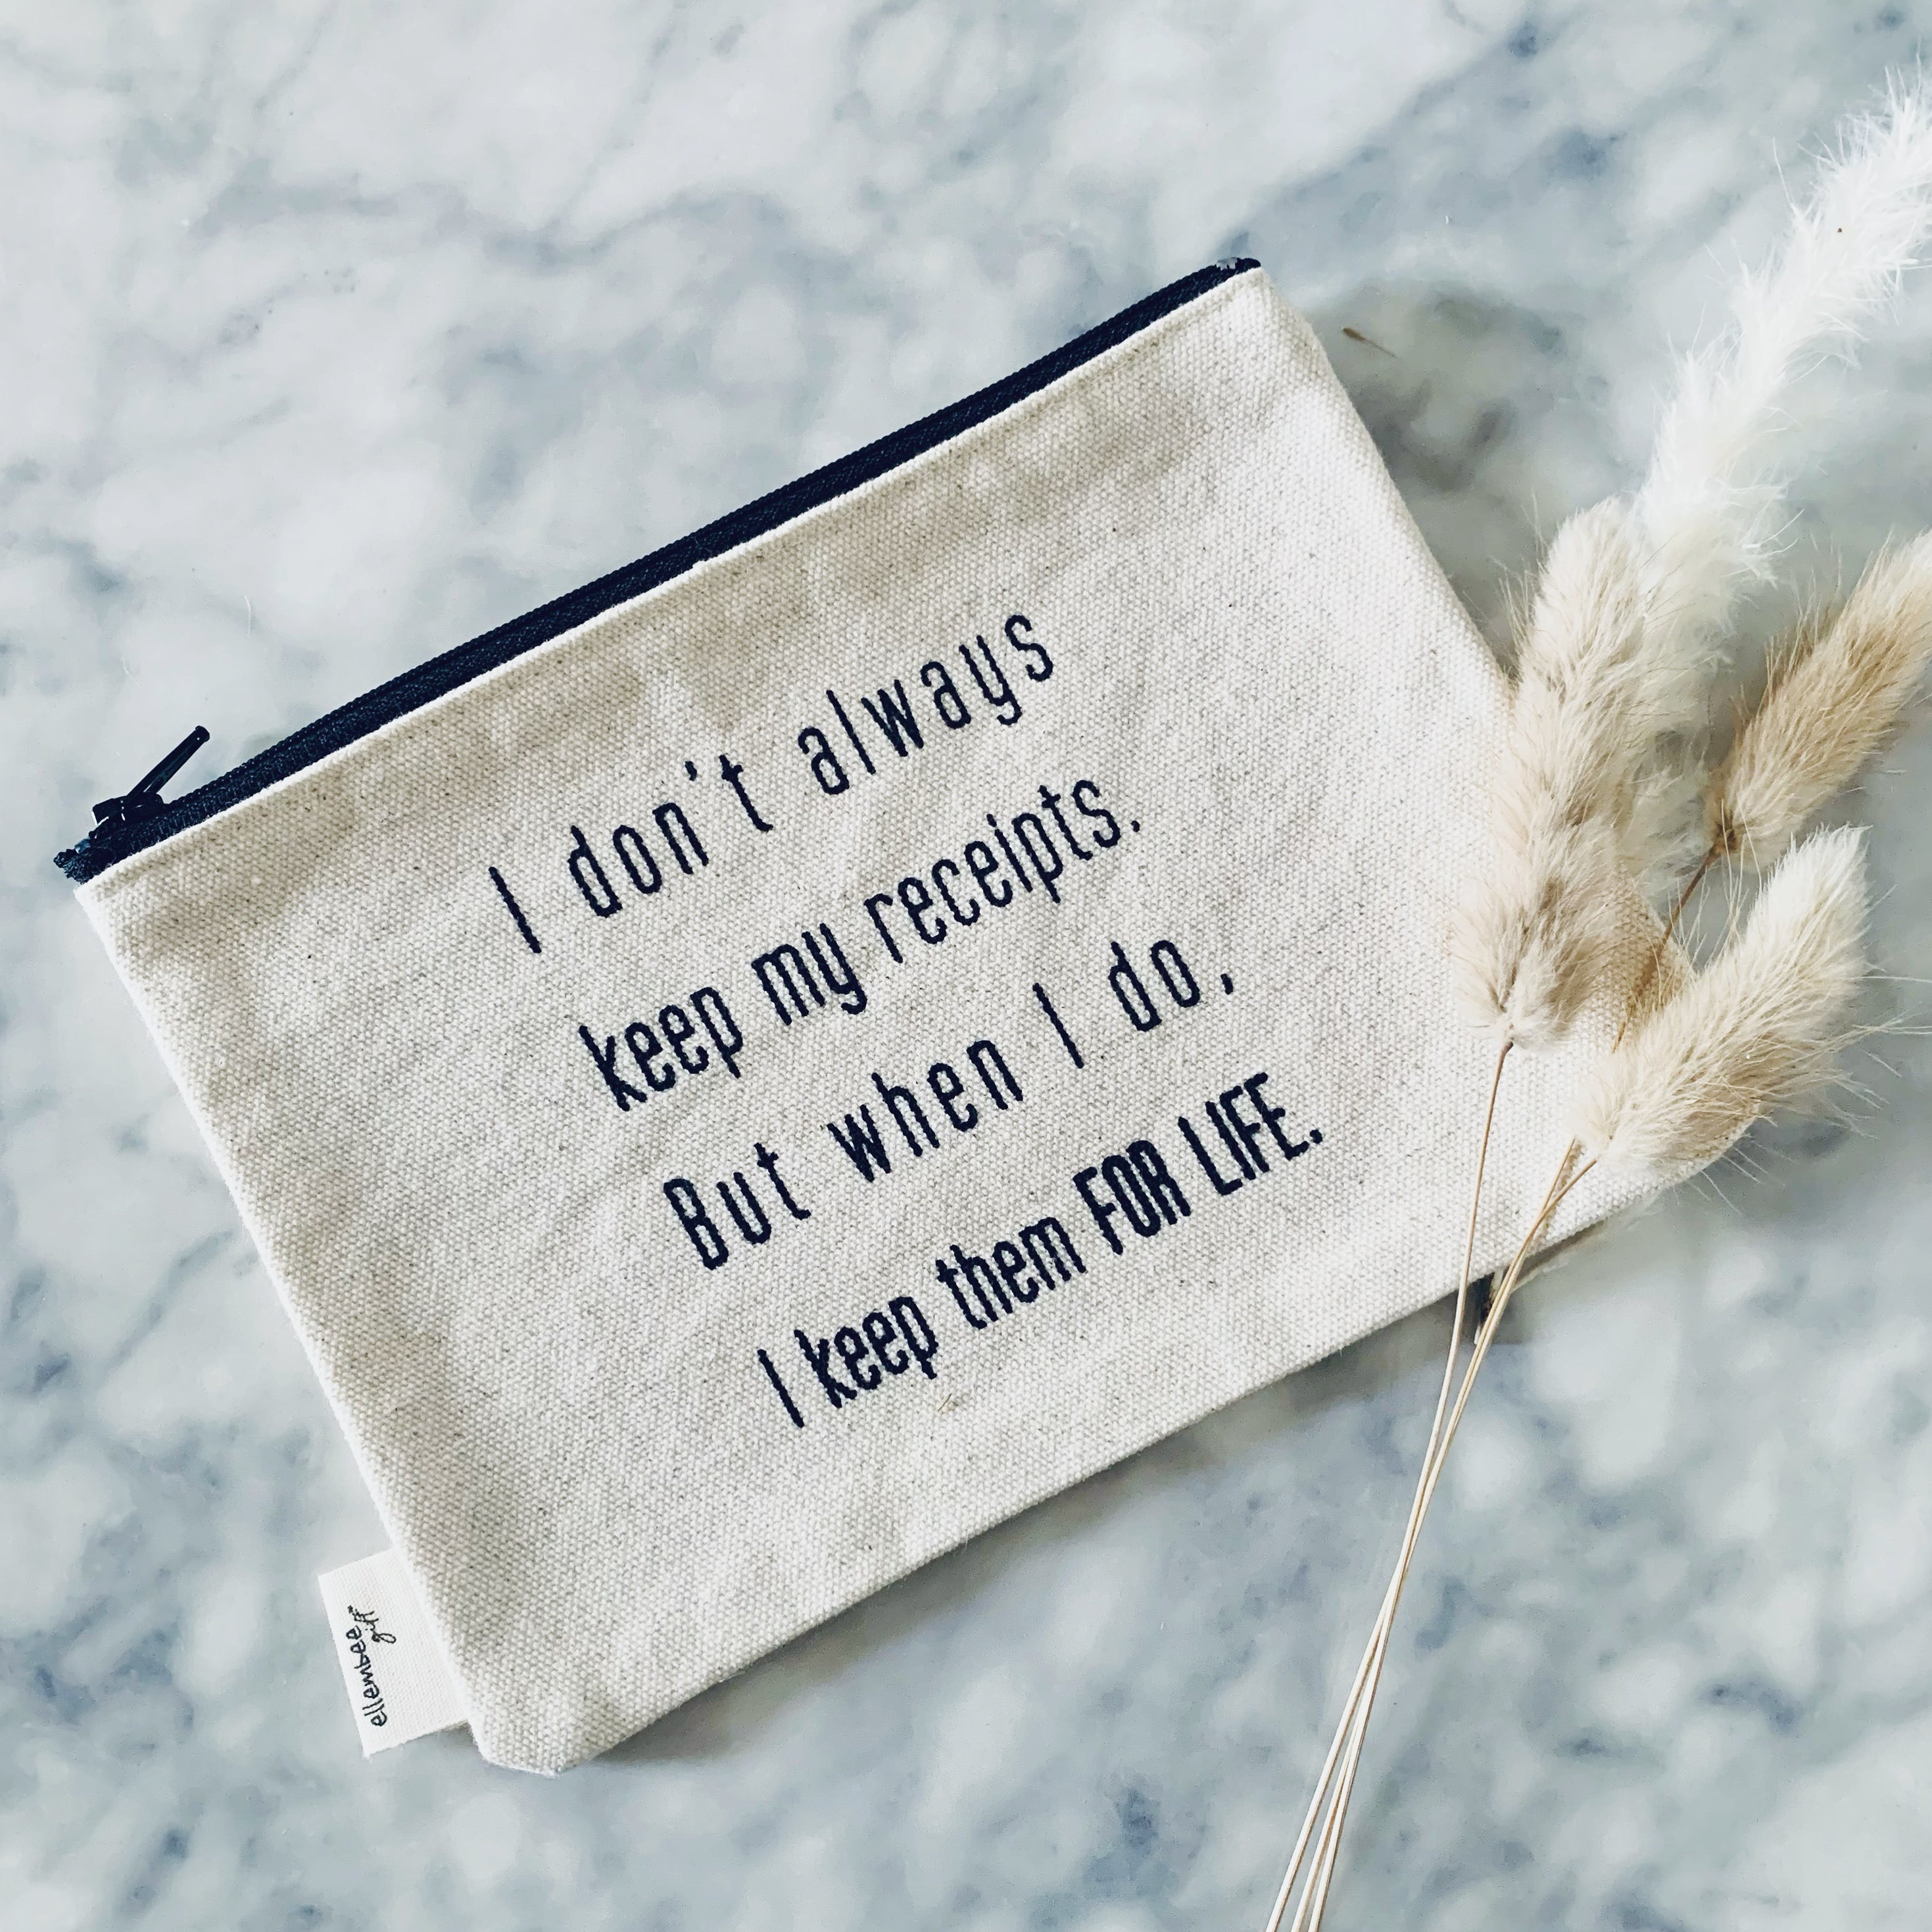 I don't always keep my receipts. But when I do, I keep them FOR LIFE zipper pouch